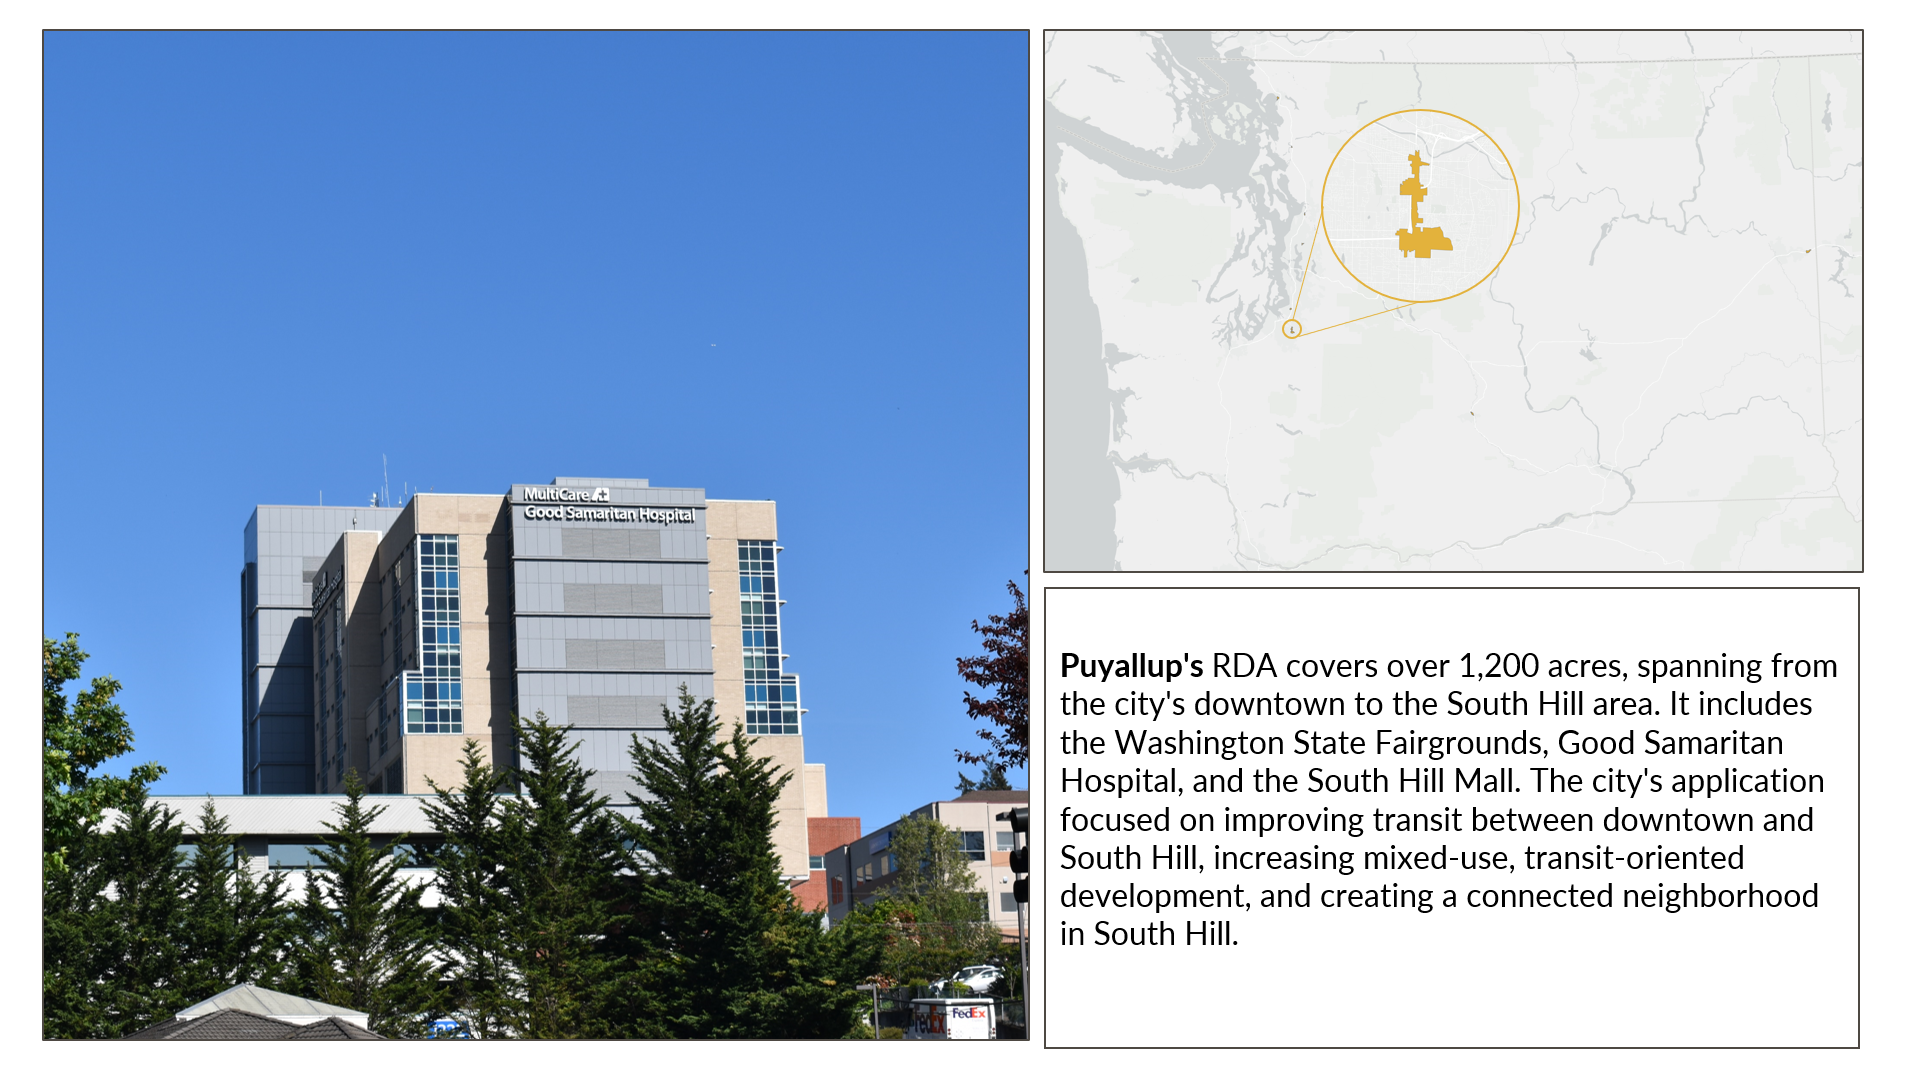 Grpahic showing map of RDA in Washington, a photo in that RDA, and the following text: Puyallup's RDA covers over 1,200 acres, spanning from the city's downtown to the South Hill area. It includes the Washington State Fairgrounds, Good Samaritan Hospital, and the South Hill Mall. The city's application focused on improving transit between downtown and South Hill, increasing mixed-use, transit-oriented development, and creating a connected neighborhood in South Hill.
                  